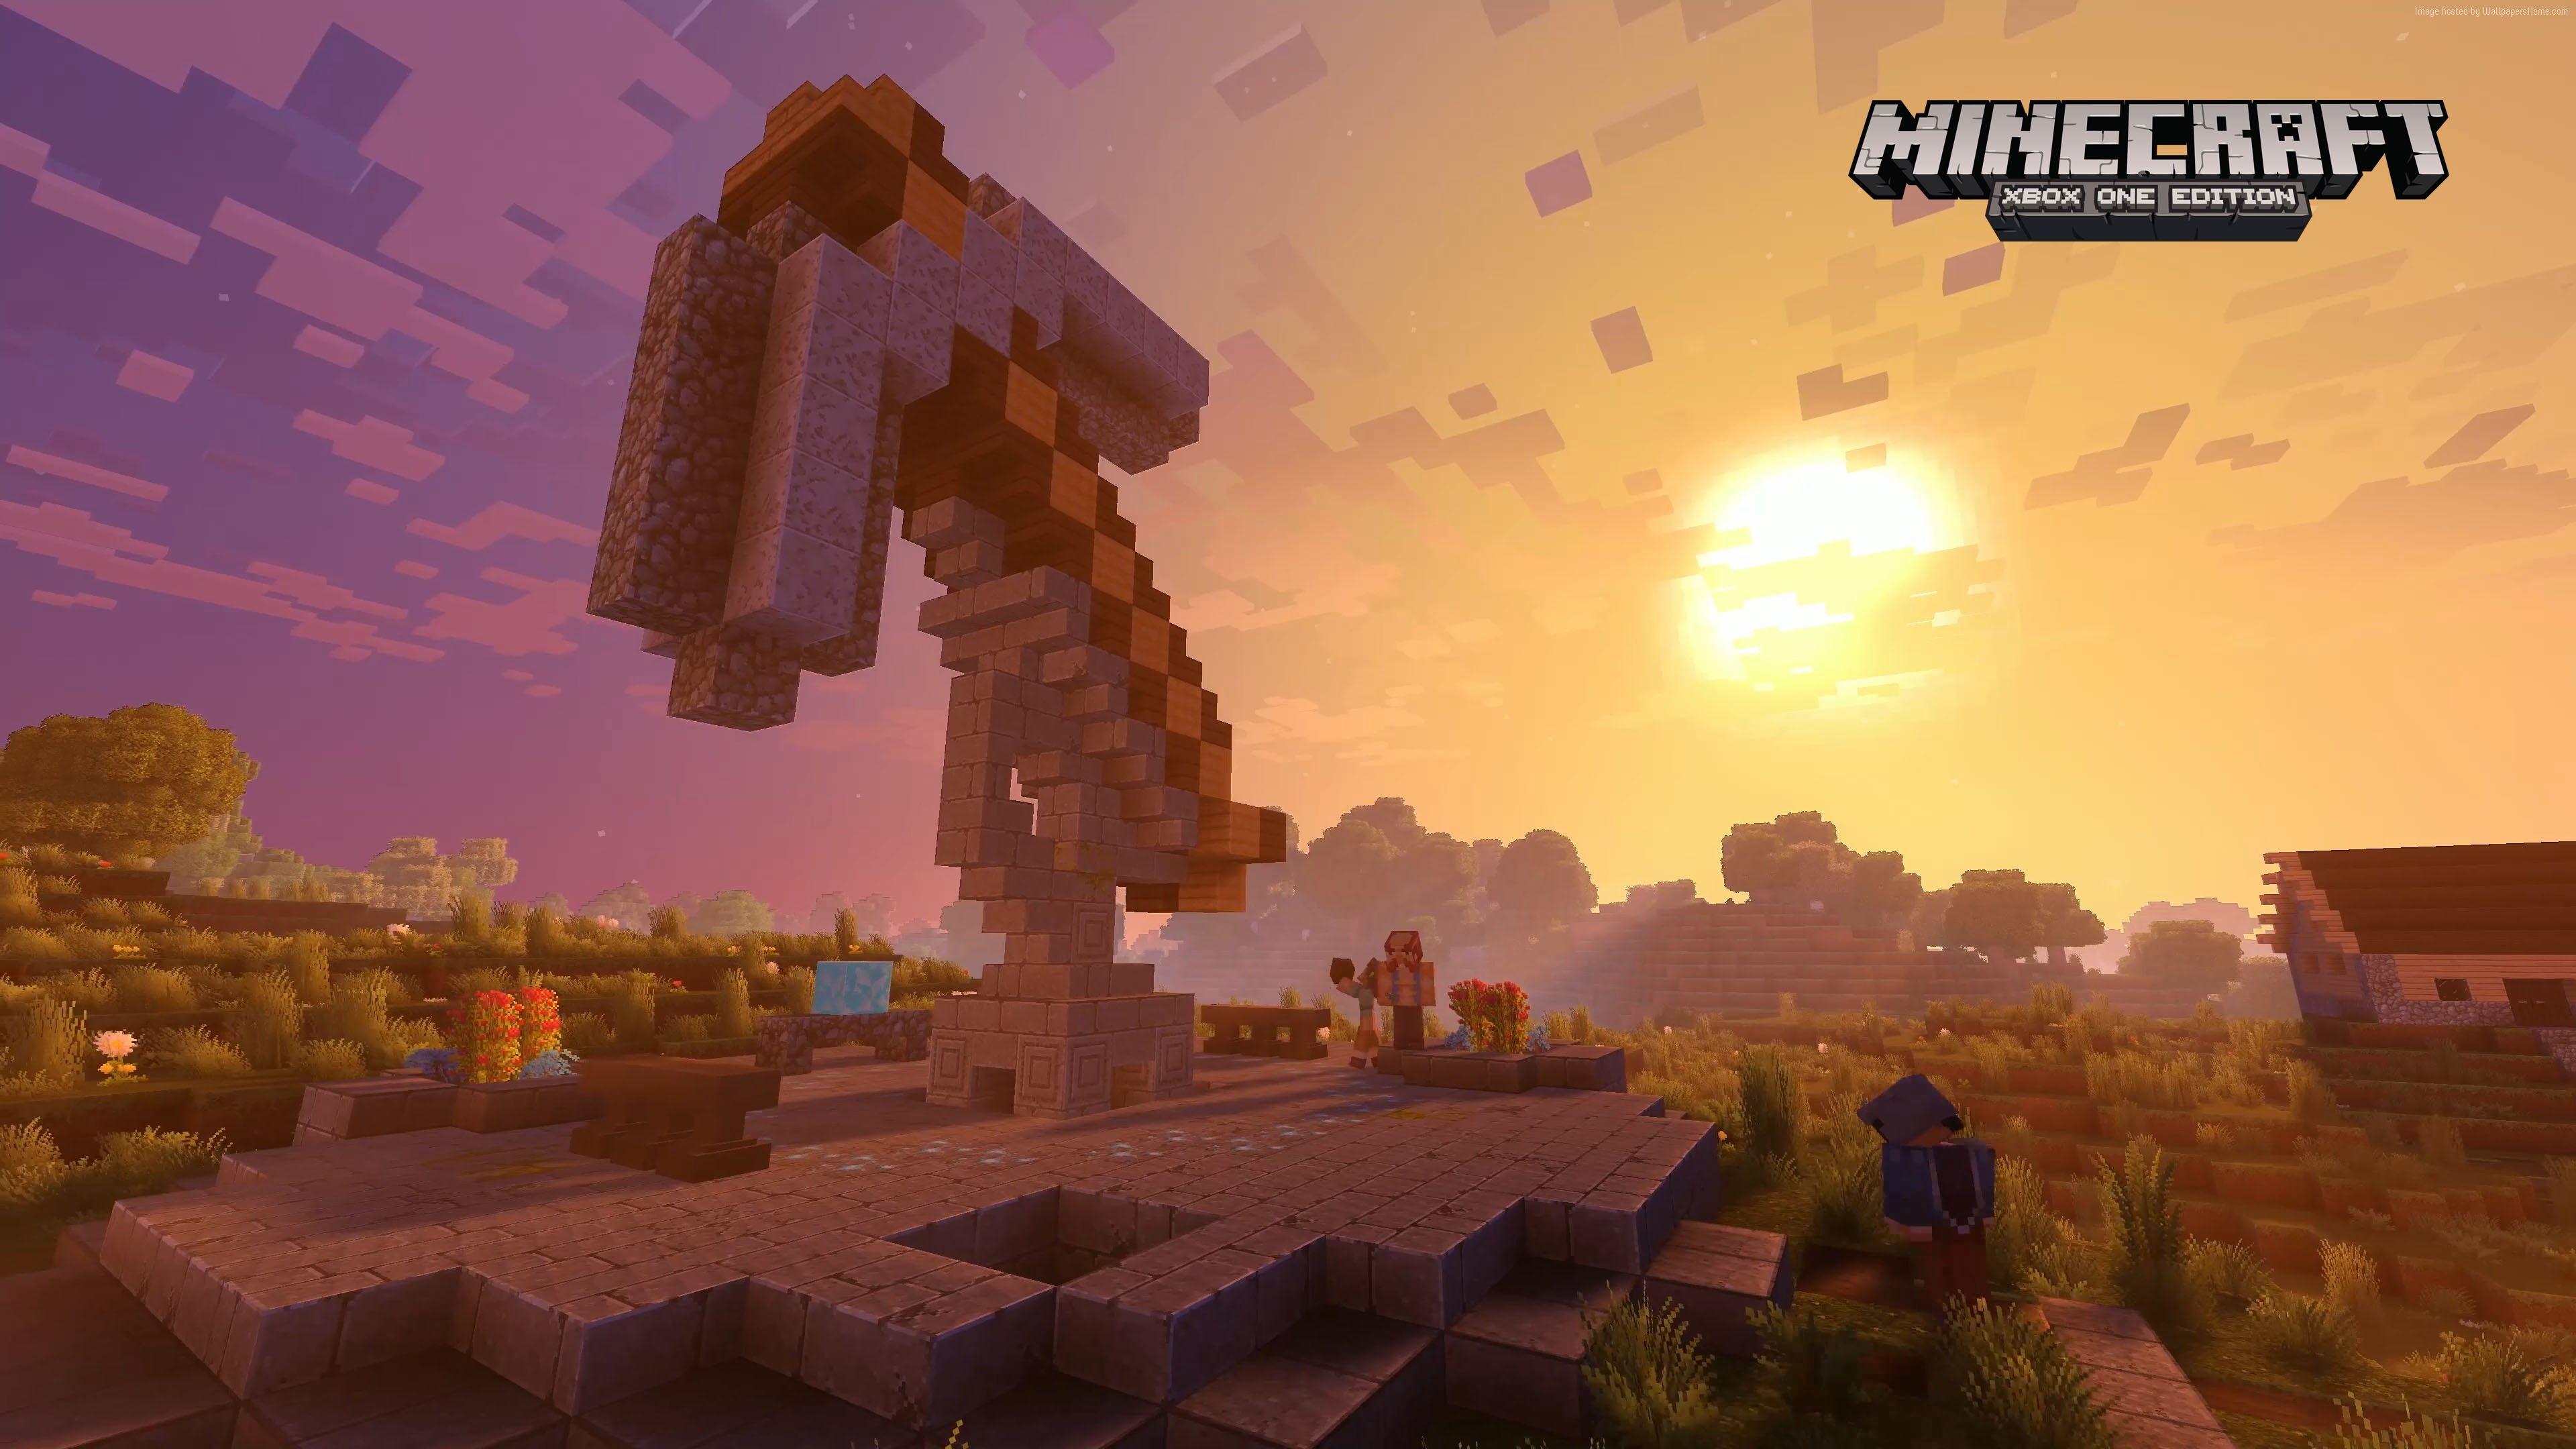 Minecraft Xbox One, the first game to use the new engine - Minecraft